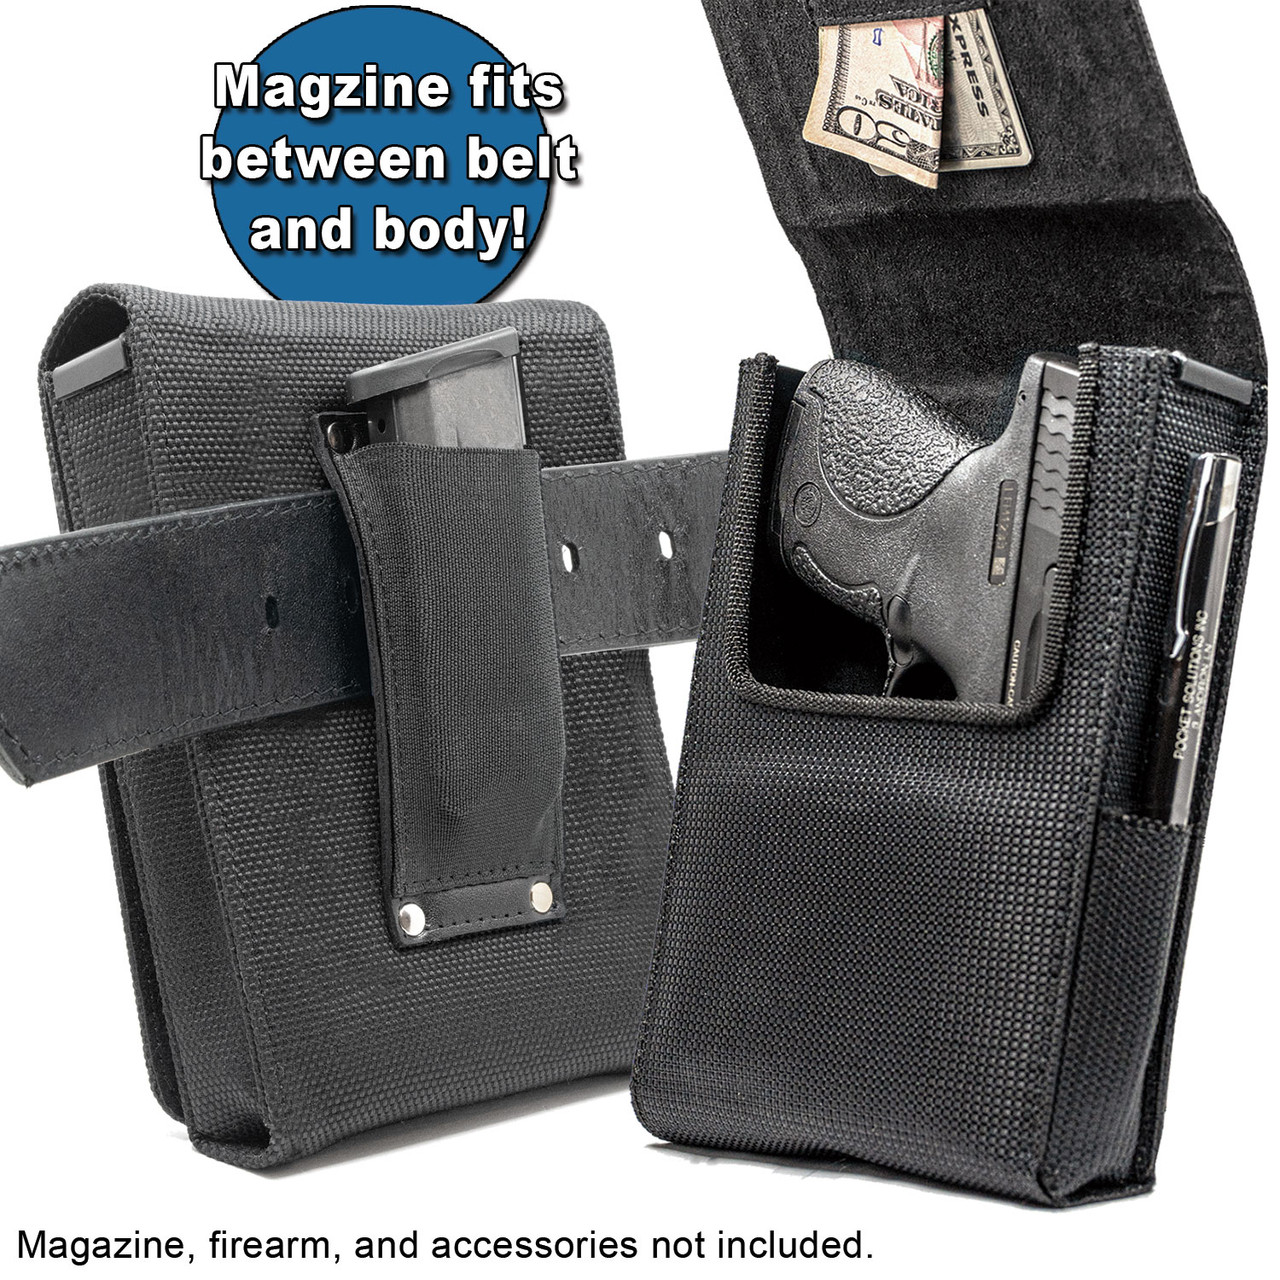 The Walther PPK/S Max Defense Holster